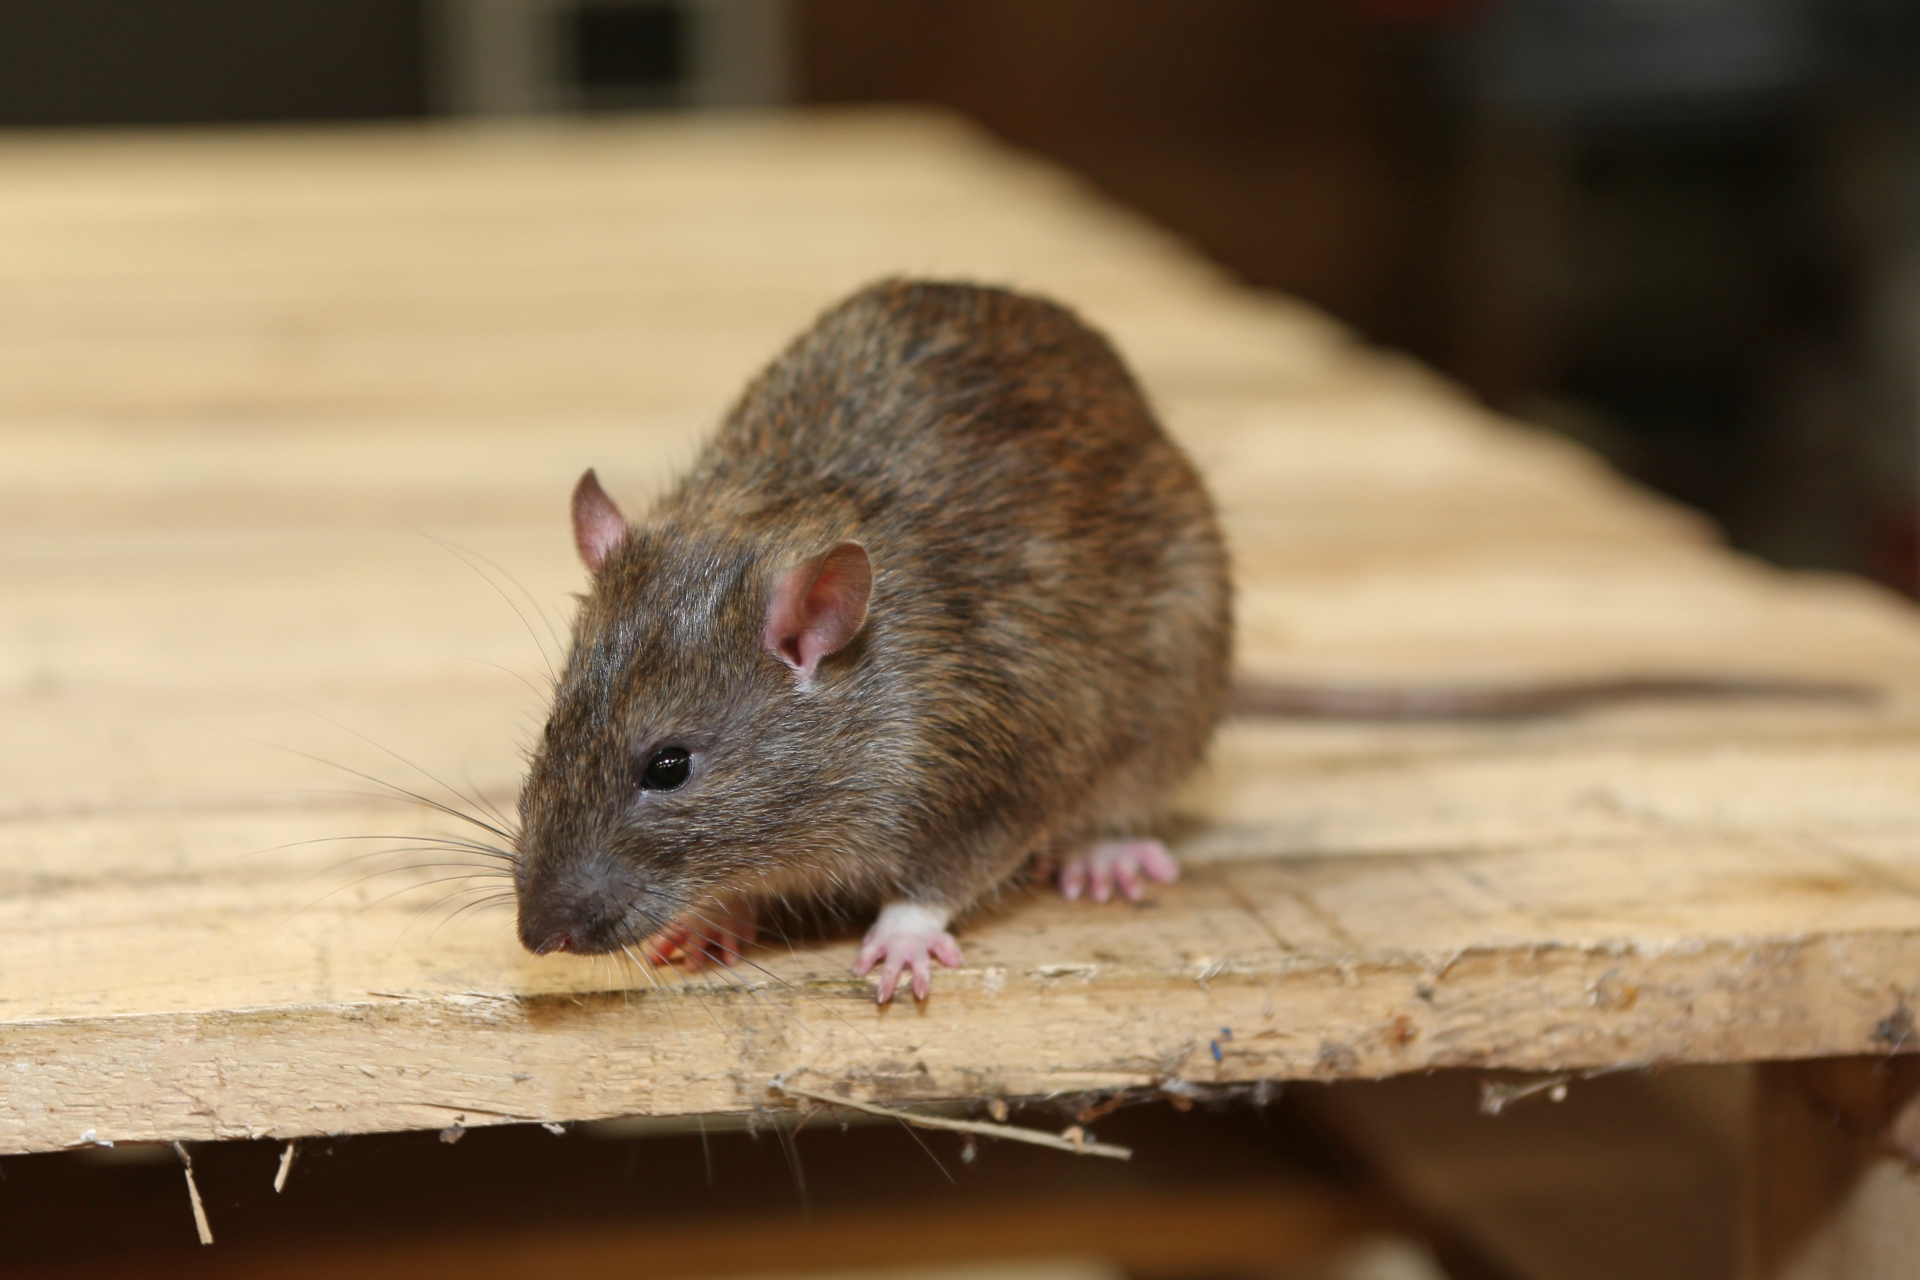 Rat Control, Pest Control in Soho, W1. Call Now 020 8166 9746